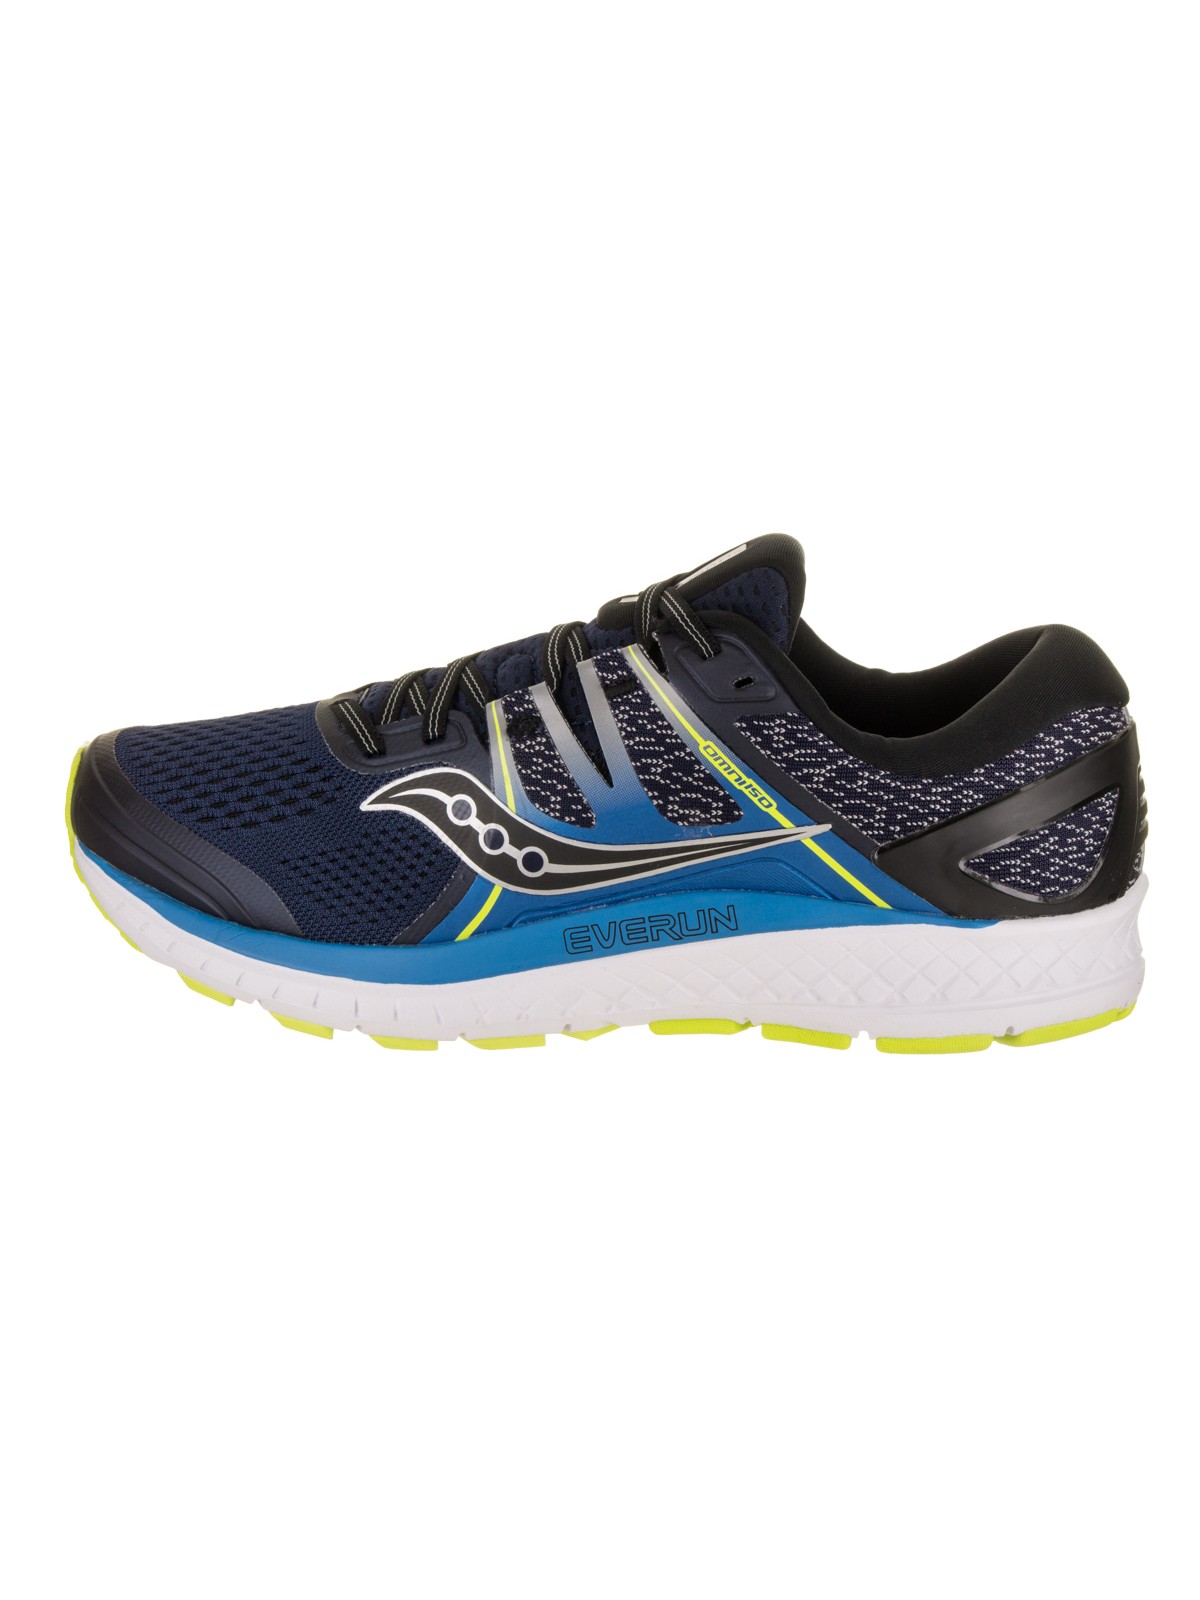 Saucony Mens Omni ISO Road Running Shoe Sneaker - Navy/Blue/Citron - Size 9 - image 3 of 5